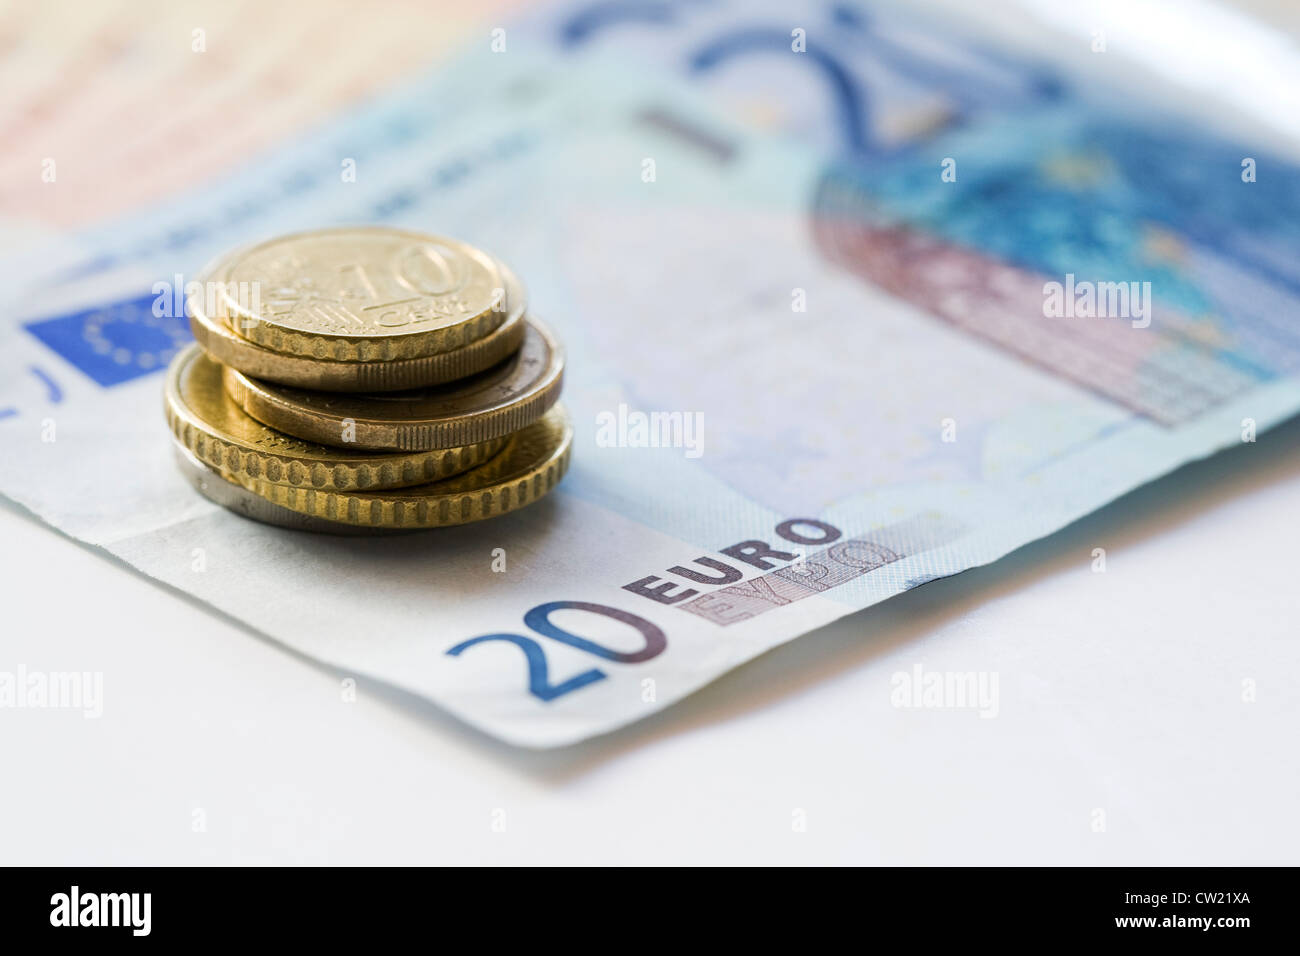 Euro coins and notes on a white background. Stock Photo